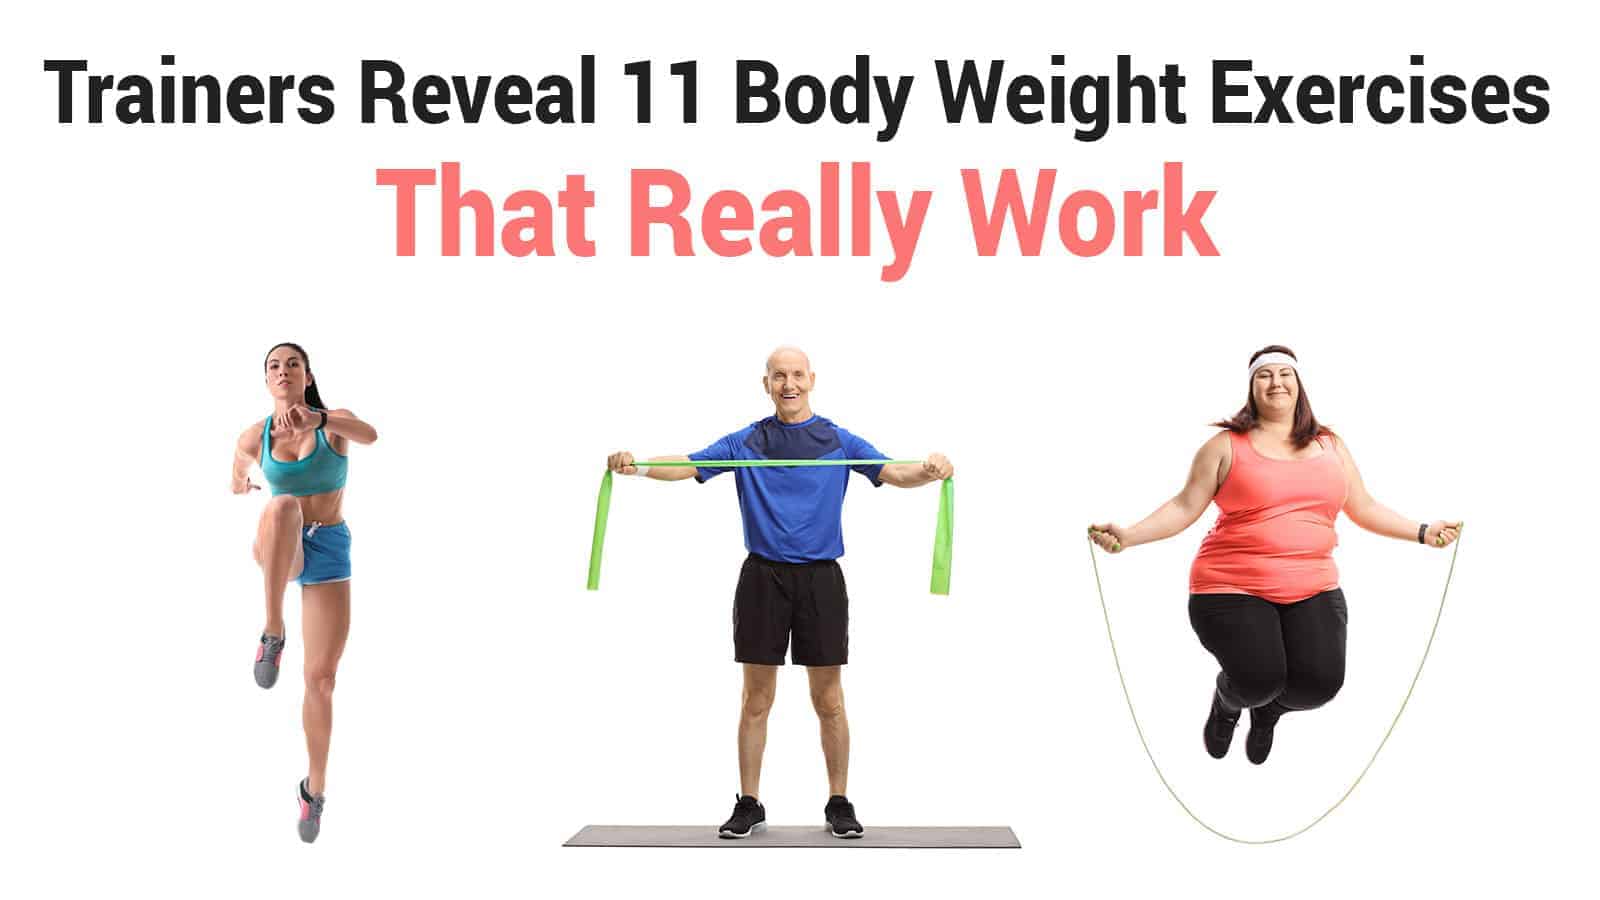 Trainers Reveal 11 Body Weight Exercises That Really Work